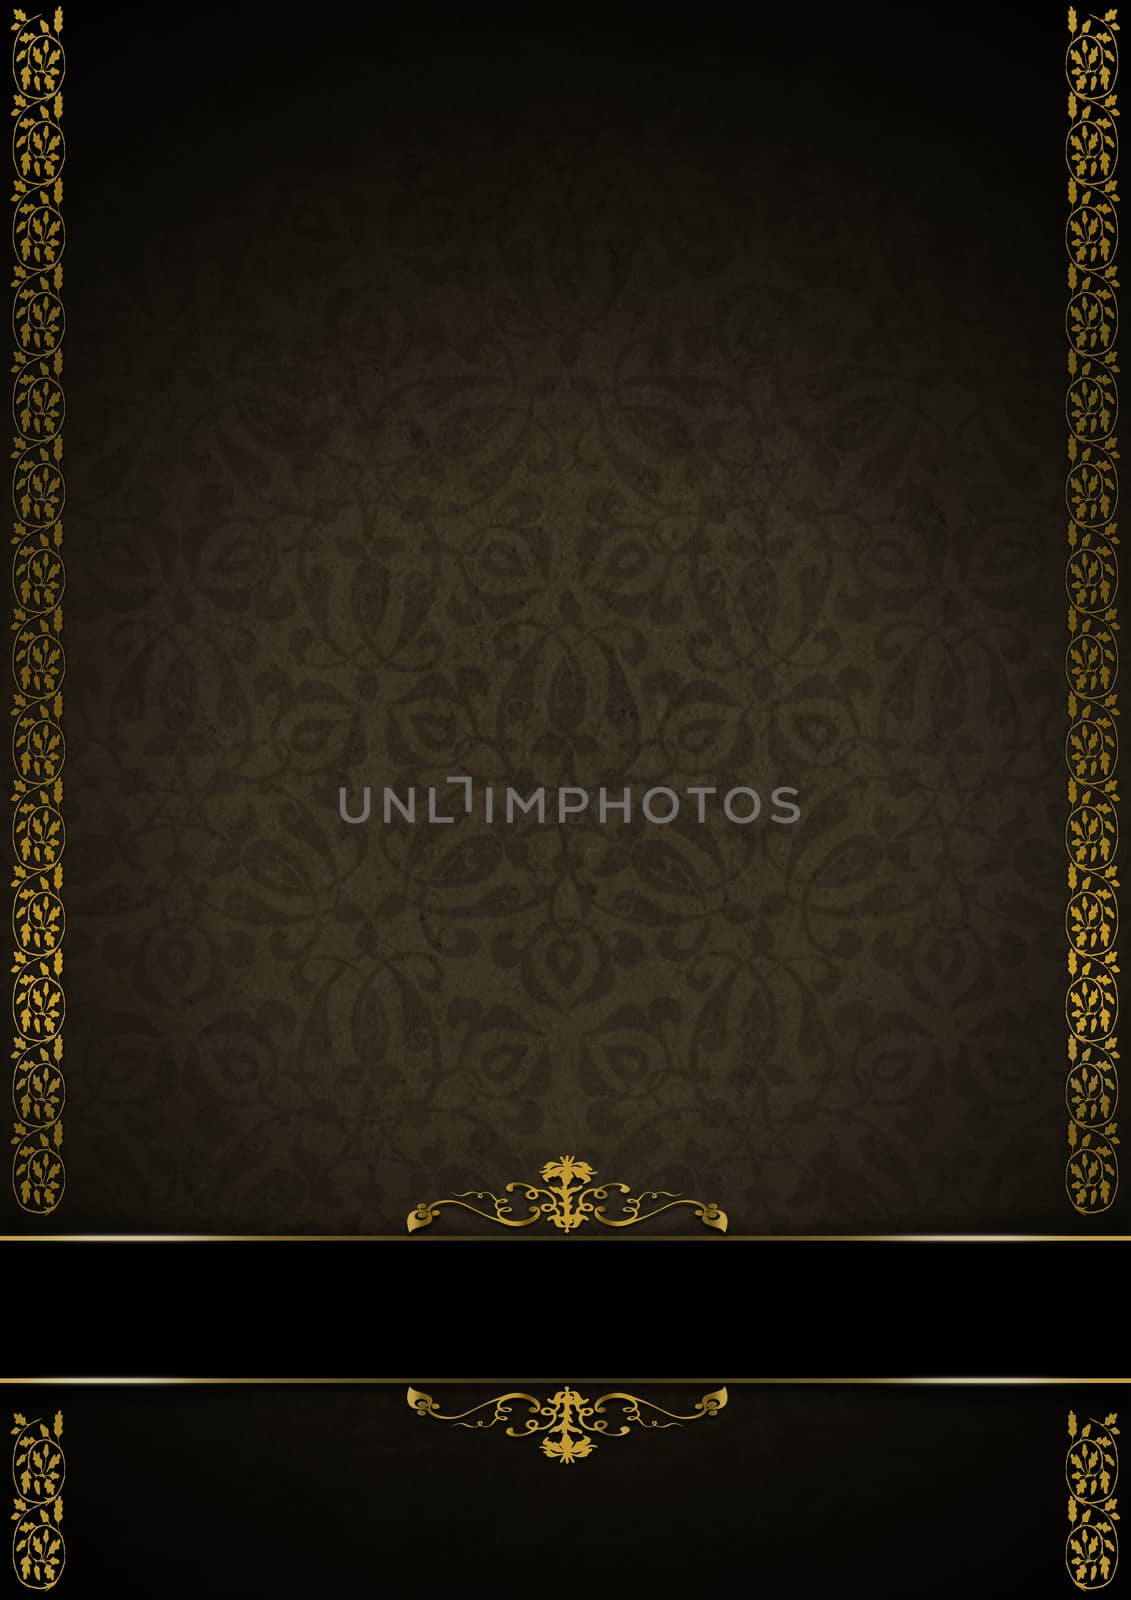 Template of aged brown texture with ornate floral seamless and black and golden plaque

